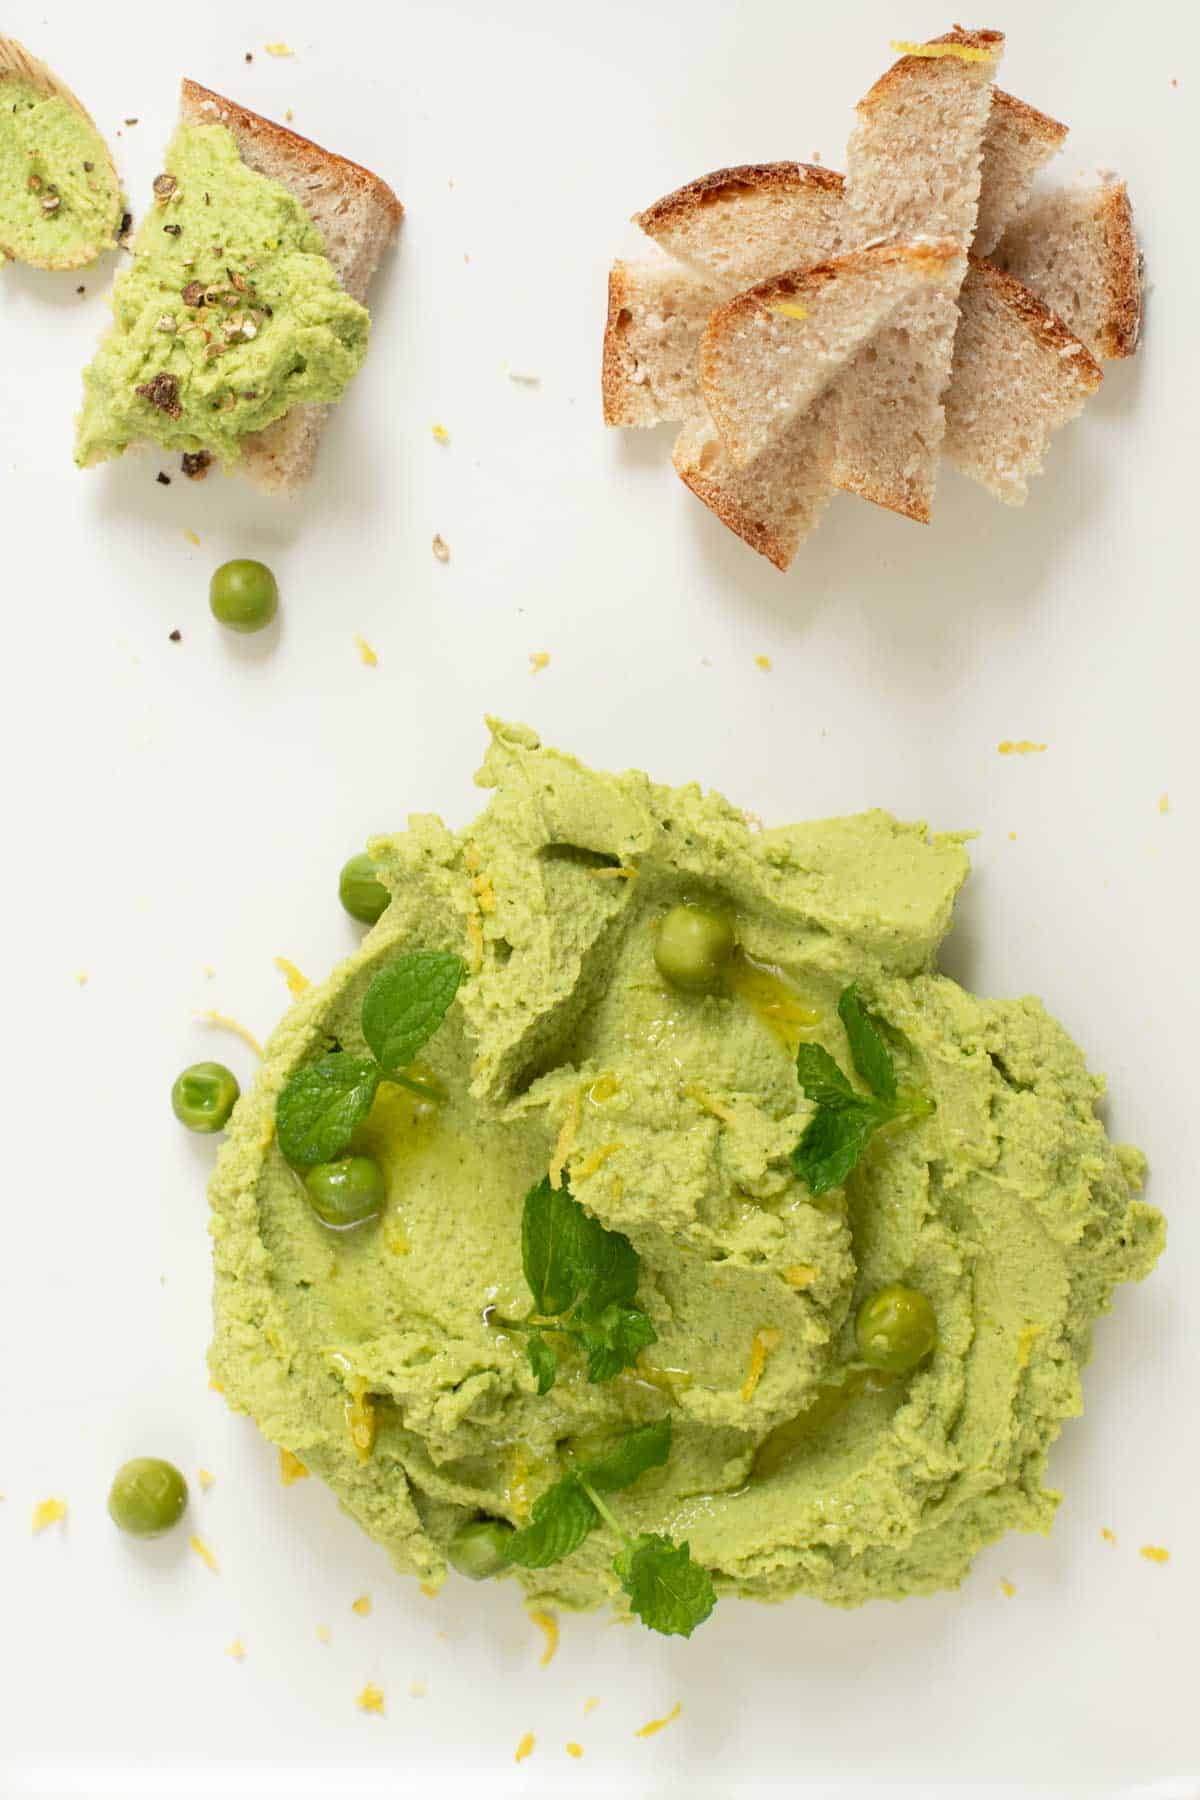 Green pean and mint dip on a plate with pieces of bread.